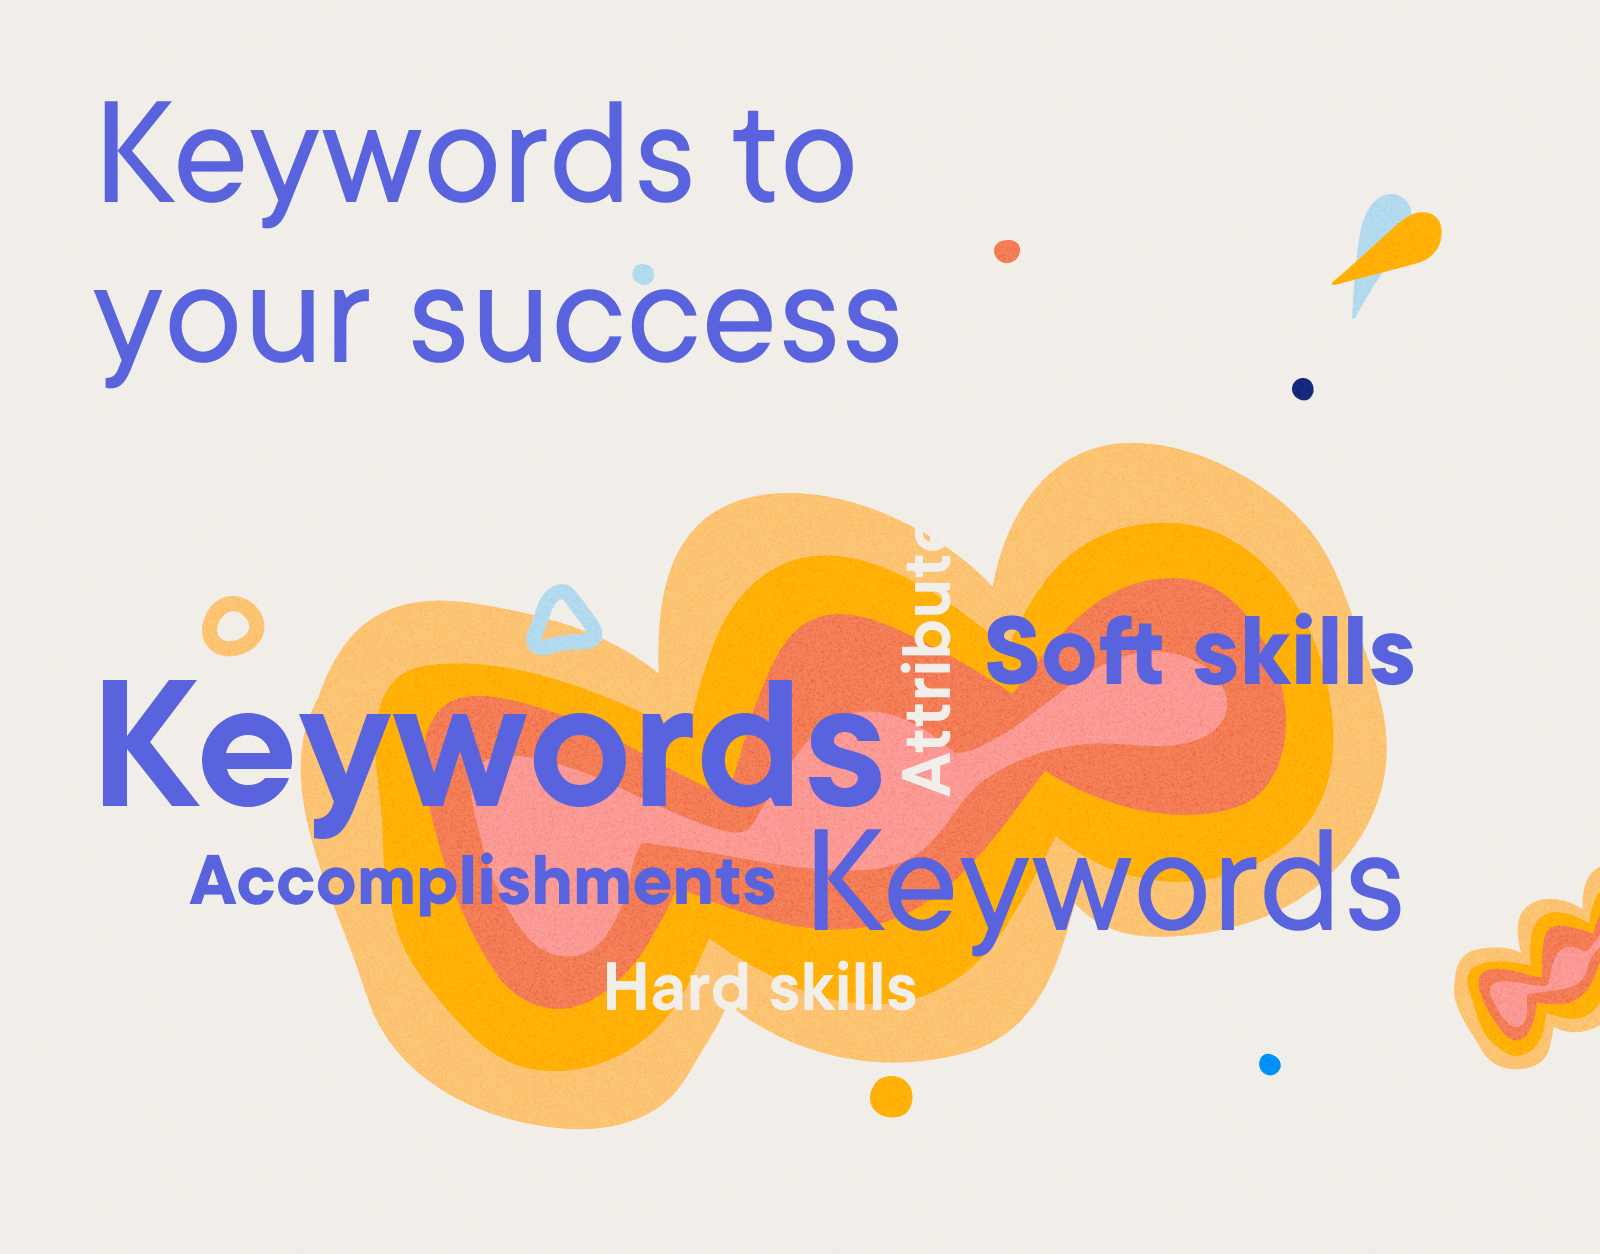 Account Manager - Keywords to your success